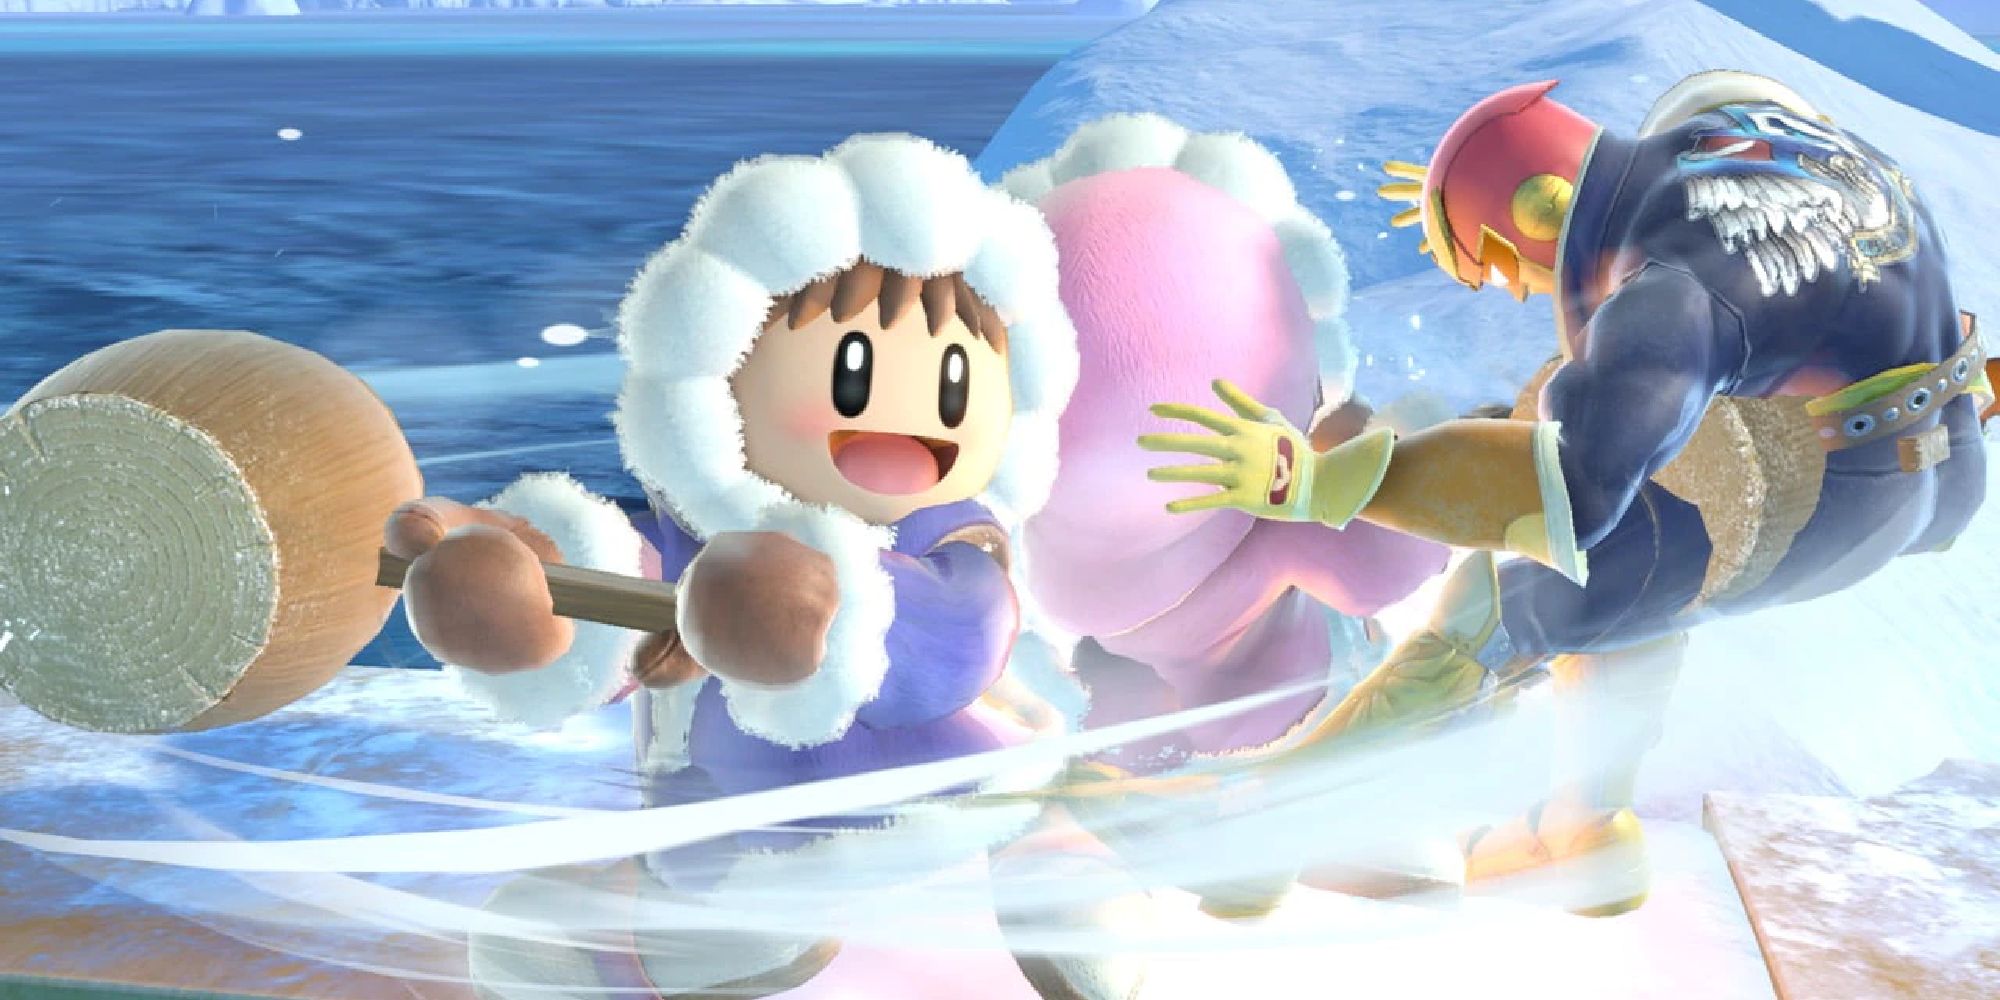 Ice Climbers spin-attacking Captain Falcon